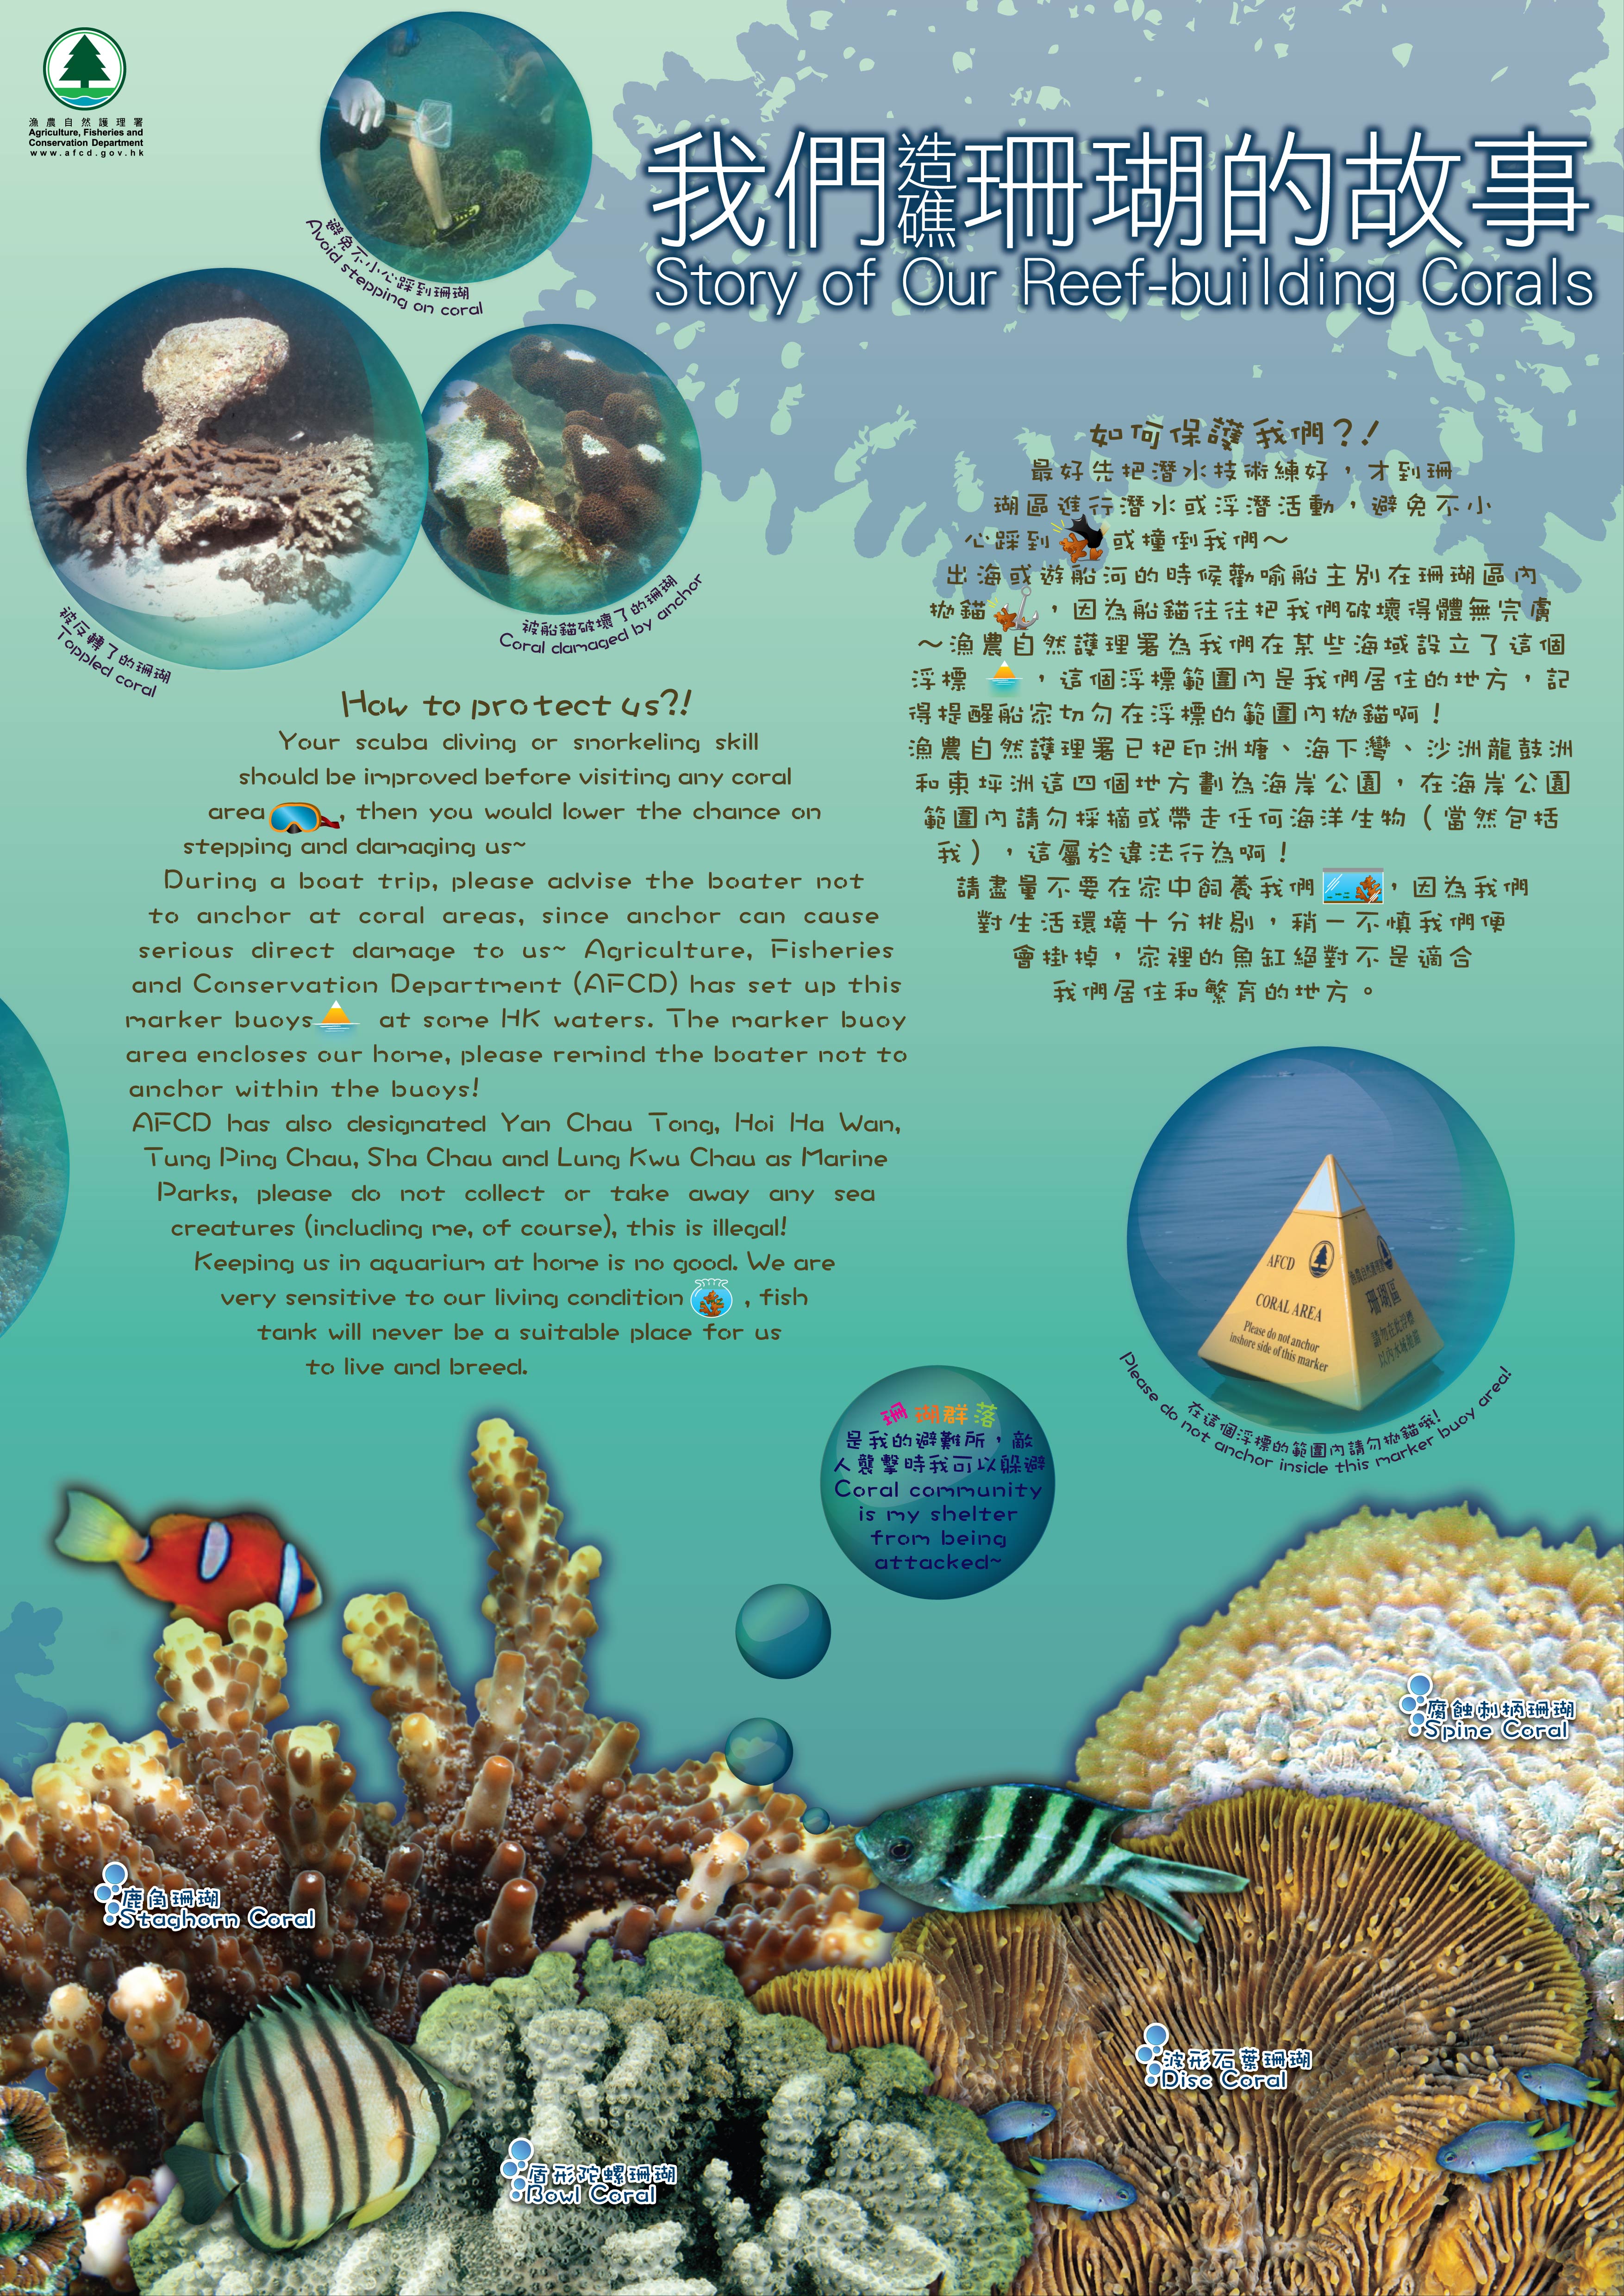 Story of our Reef-building Corals 3